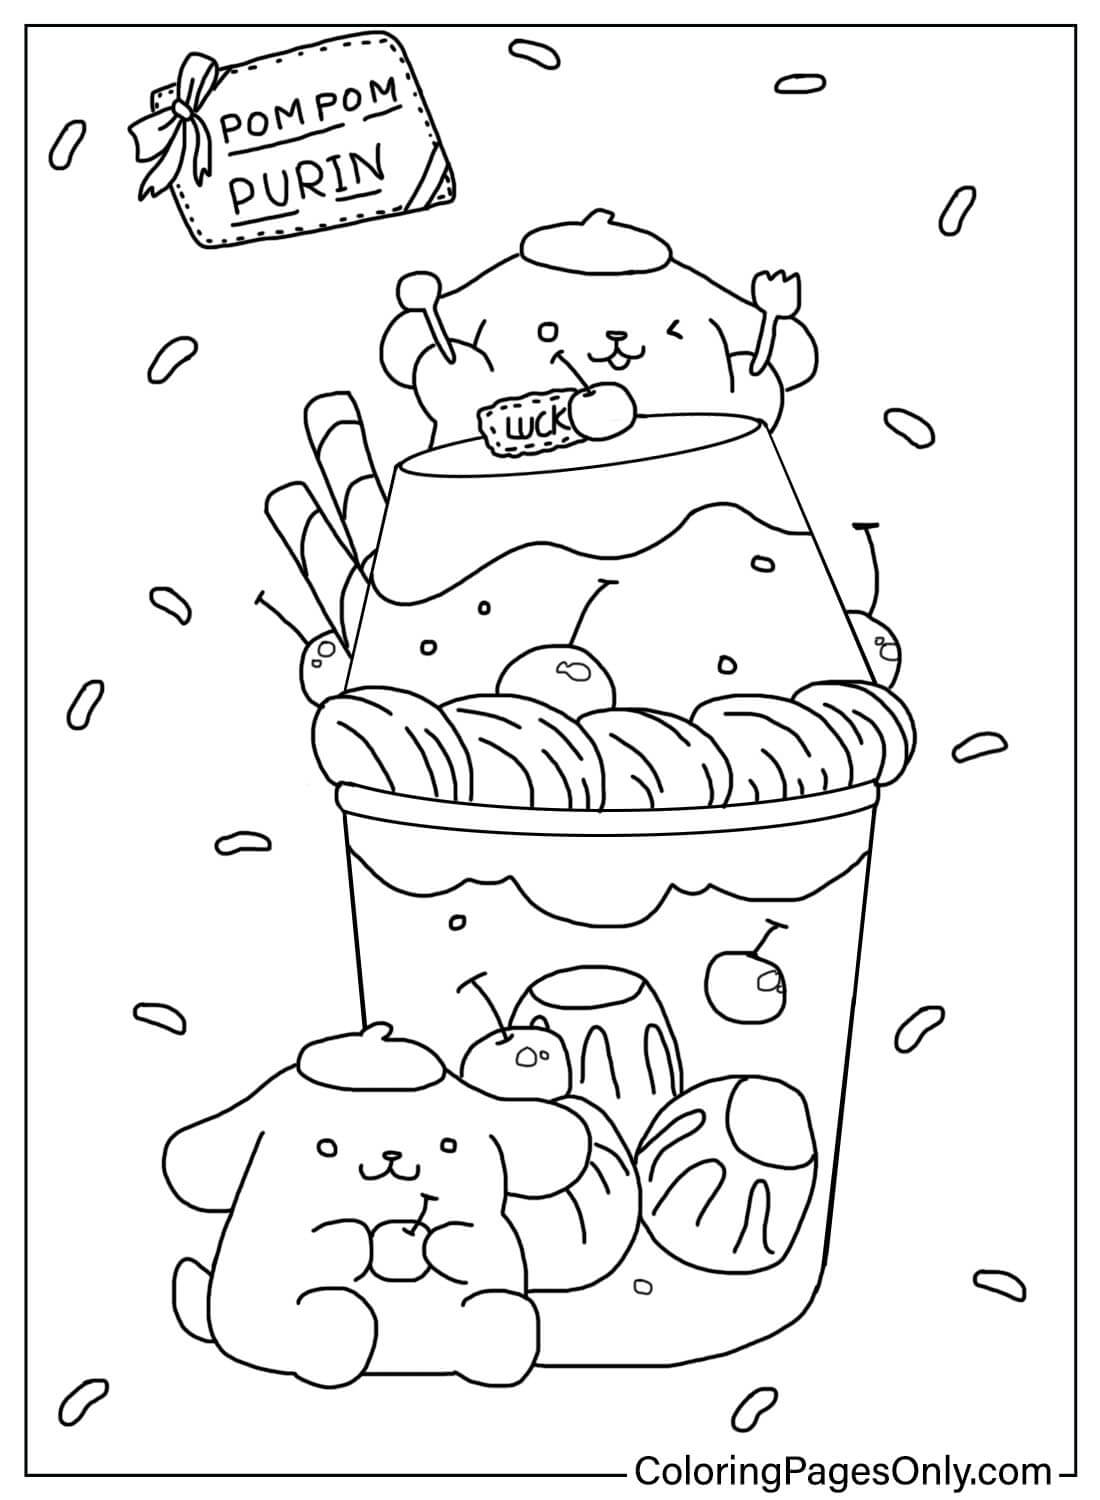 Coloring Page Printable Pompompurin from Pompompurin